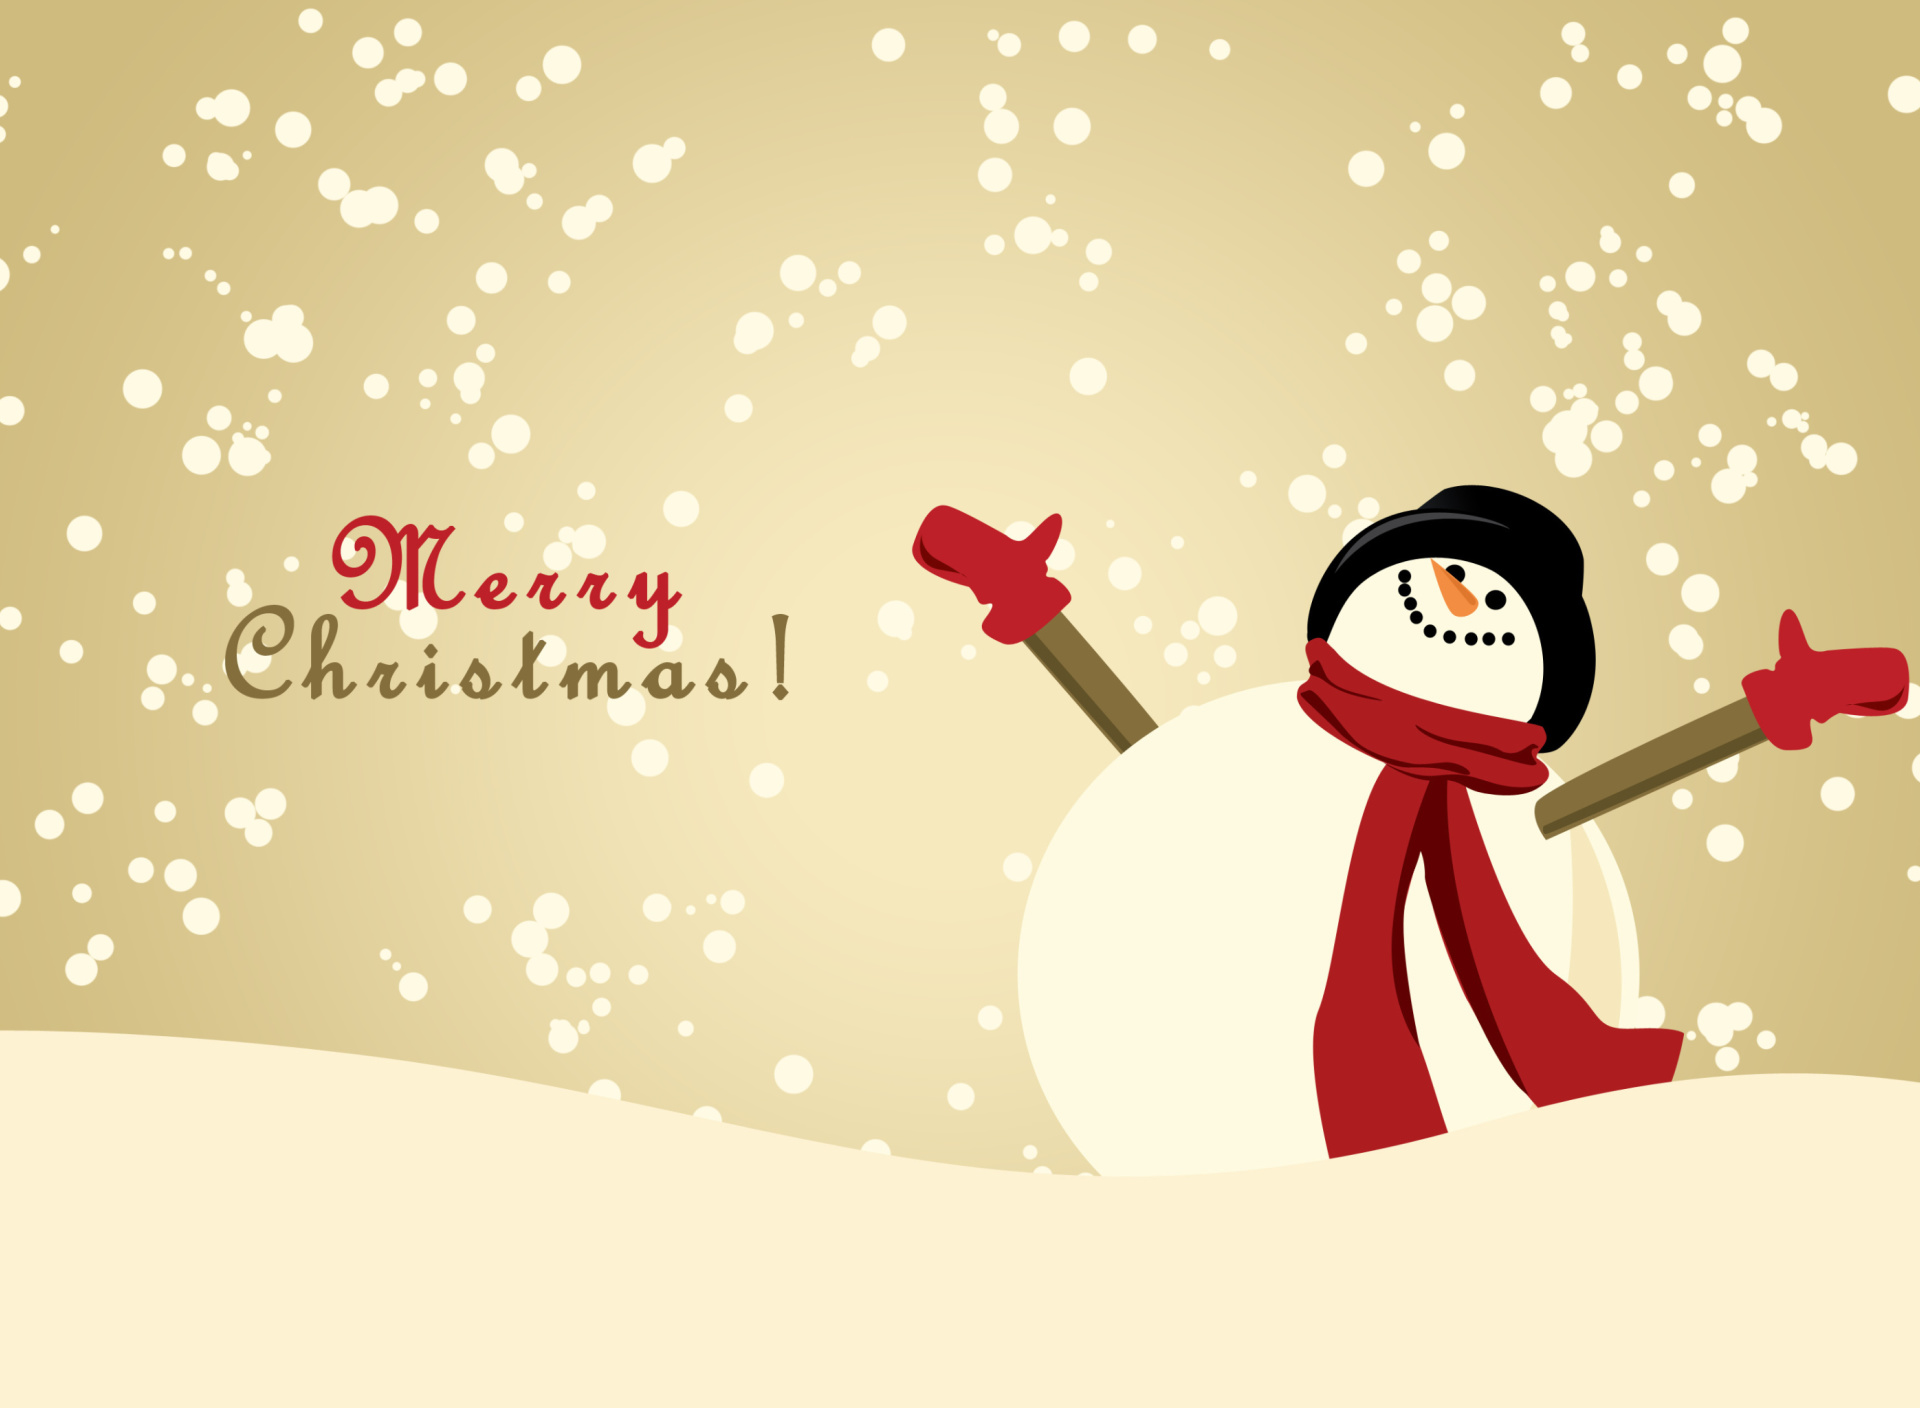 Merry Christmas Wishes from Snowman screenshot #1 1920x1408